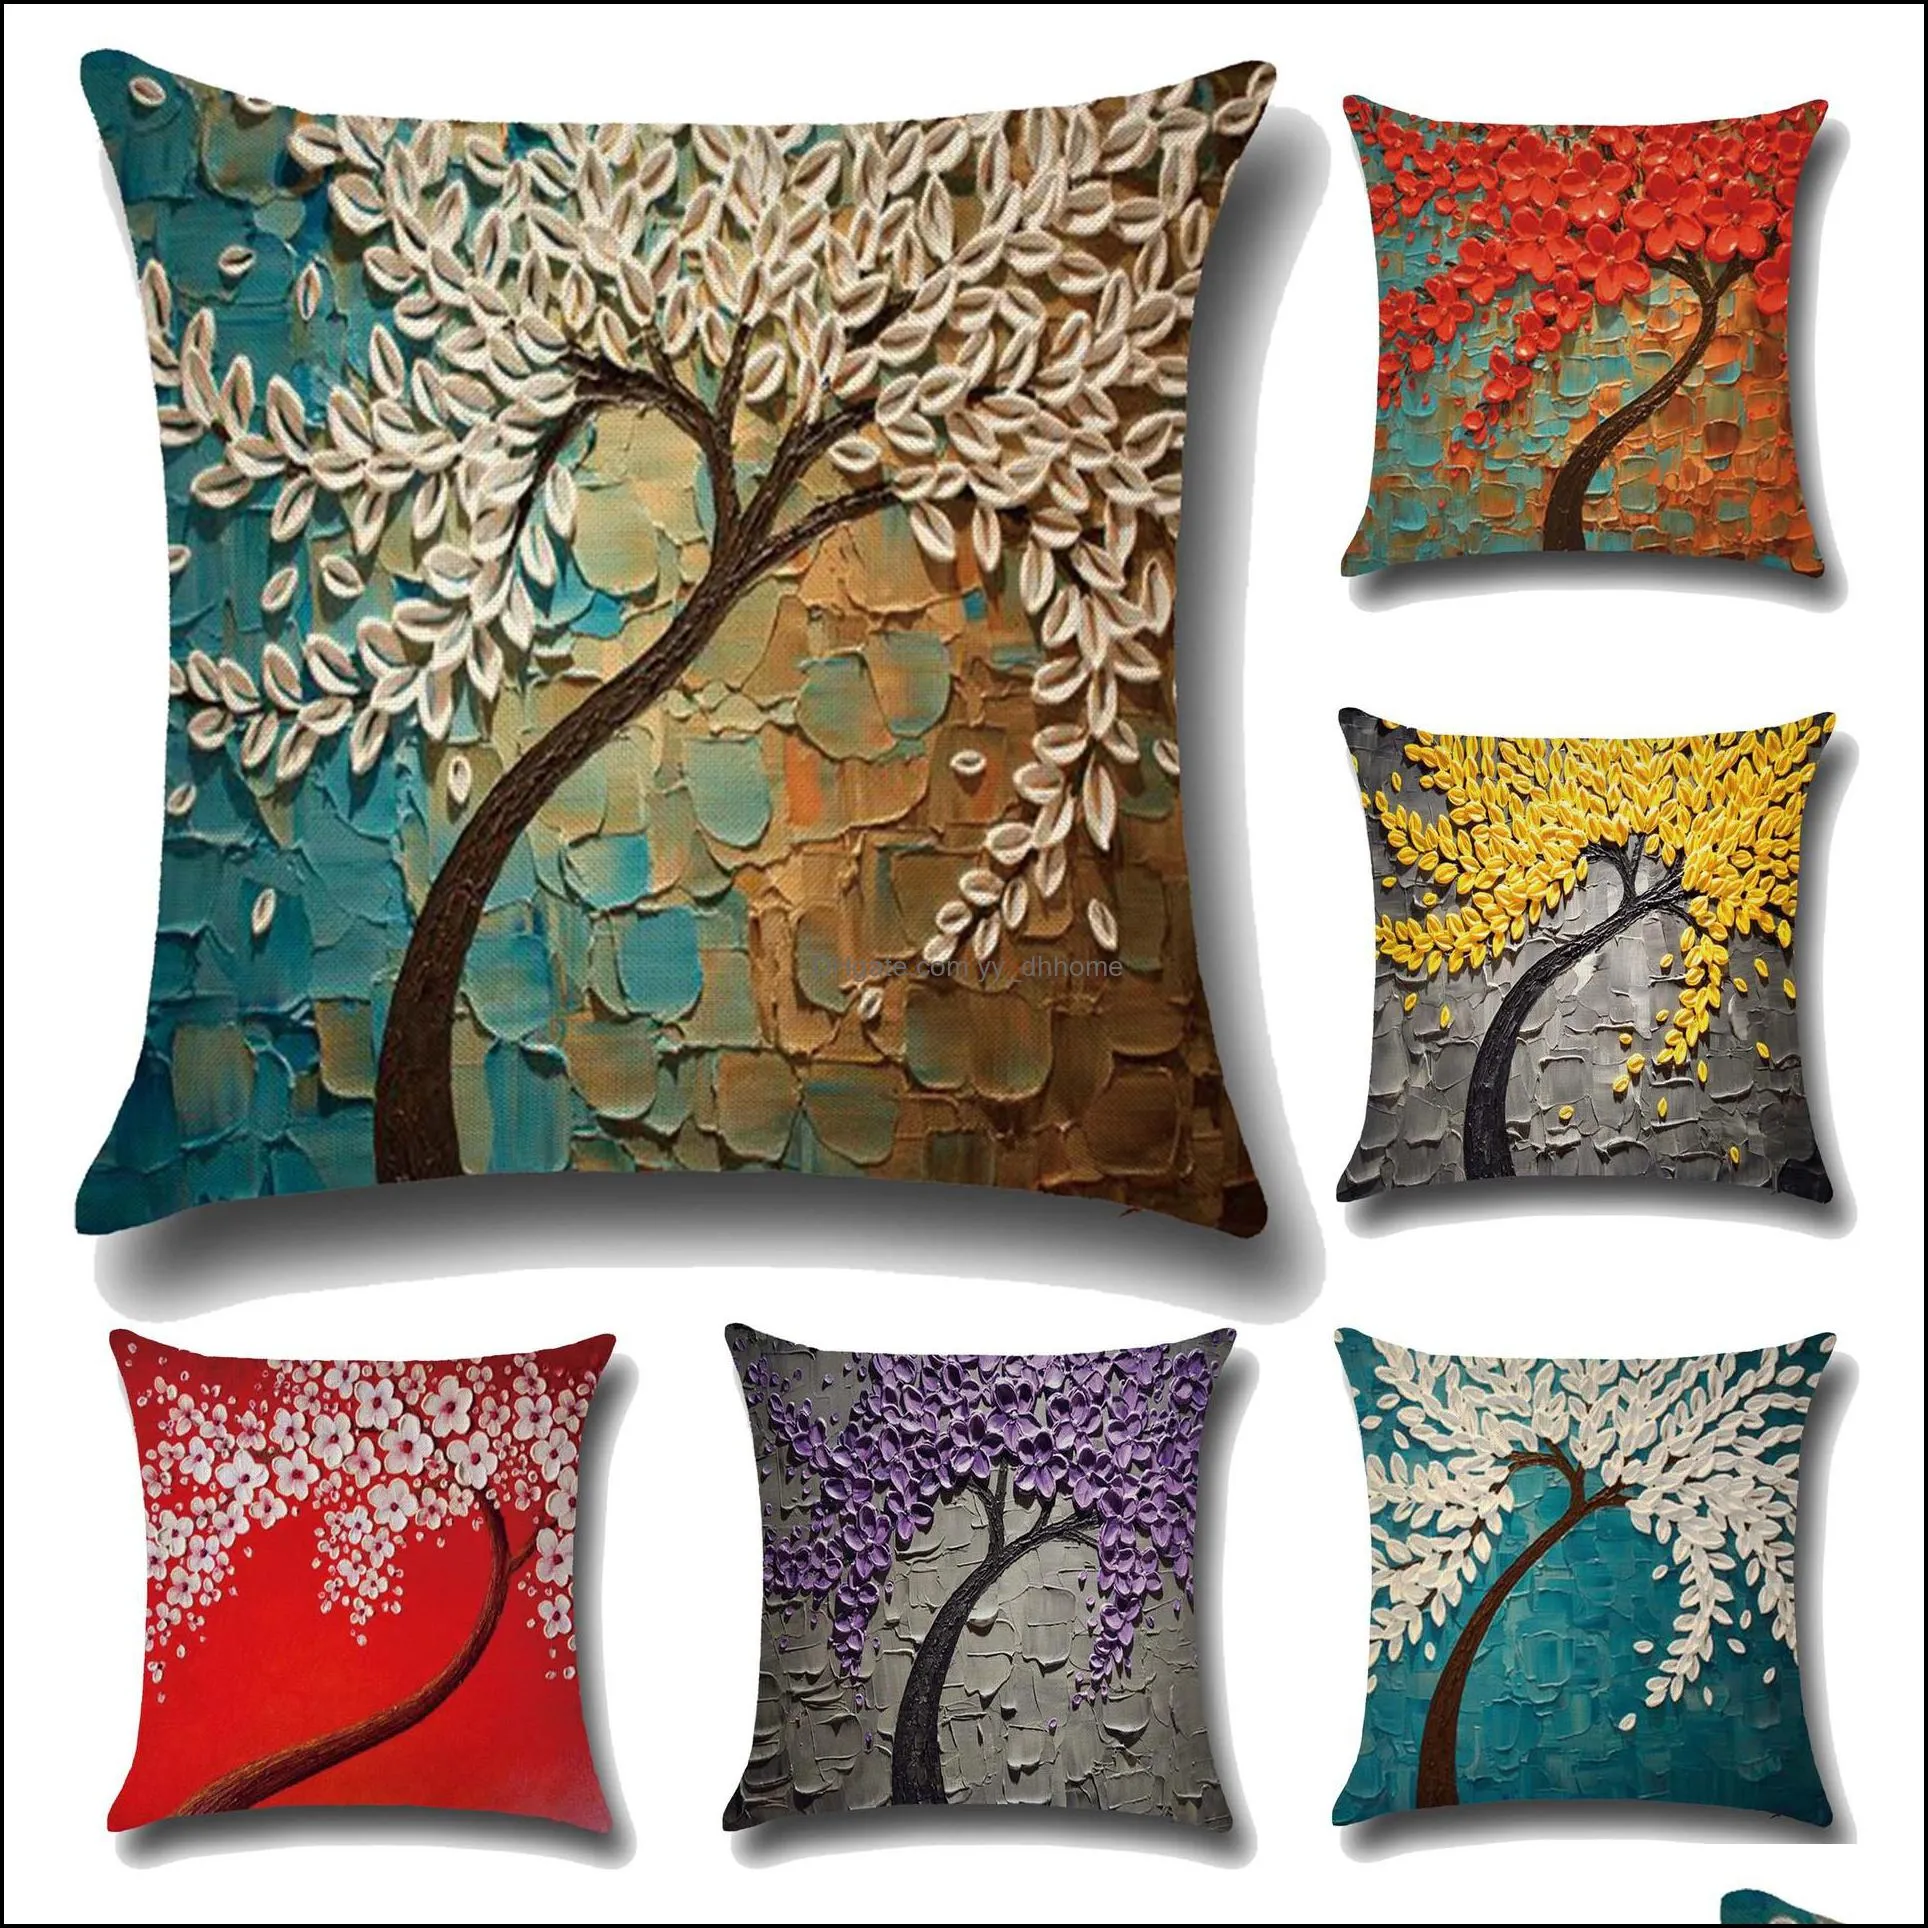 Cushion/Decorative Pillow Home Textiles & Garden Cushion Er Vintage Flower Case Mural Yellow Red Tree Wintersweet Cherry Blossom Decorative